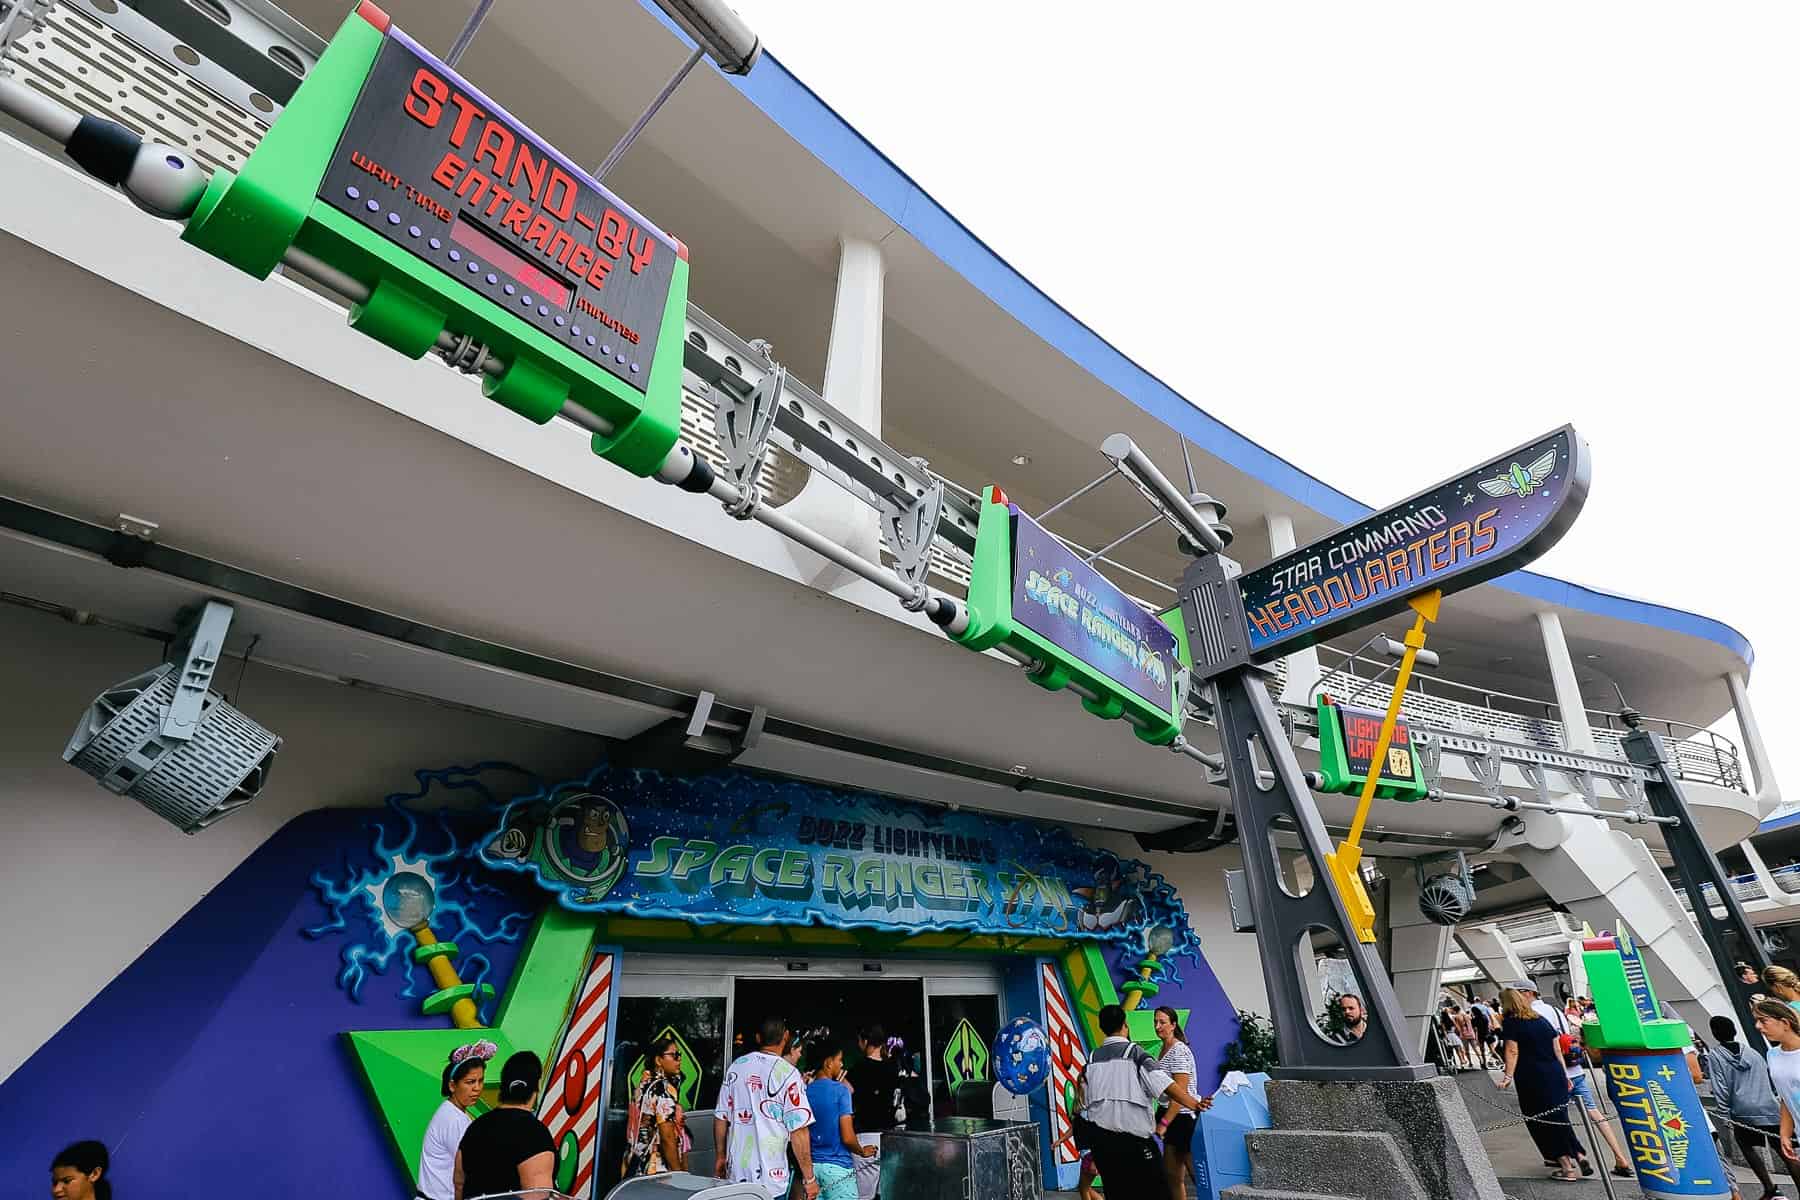 Buzz Lightyear’s Space Ranger Spin (The Complete Ride Guide)